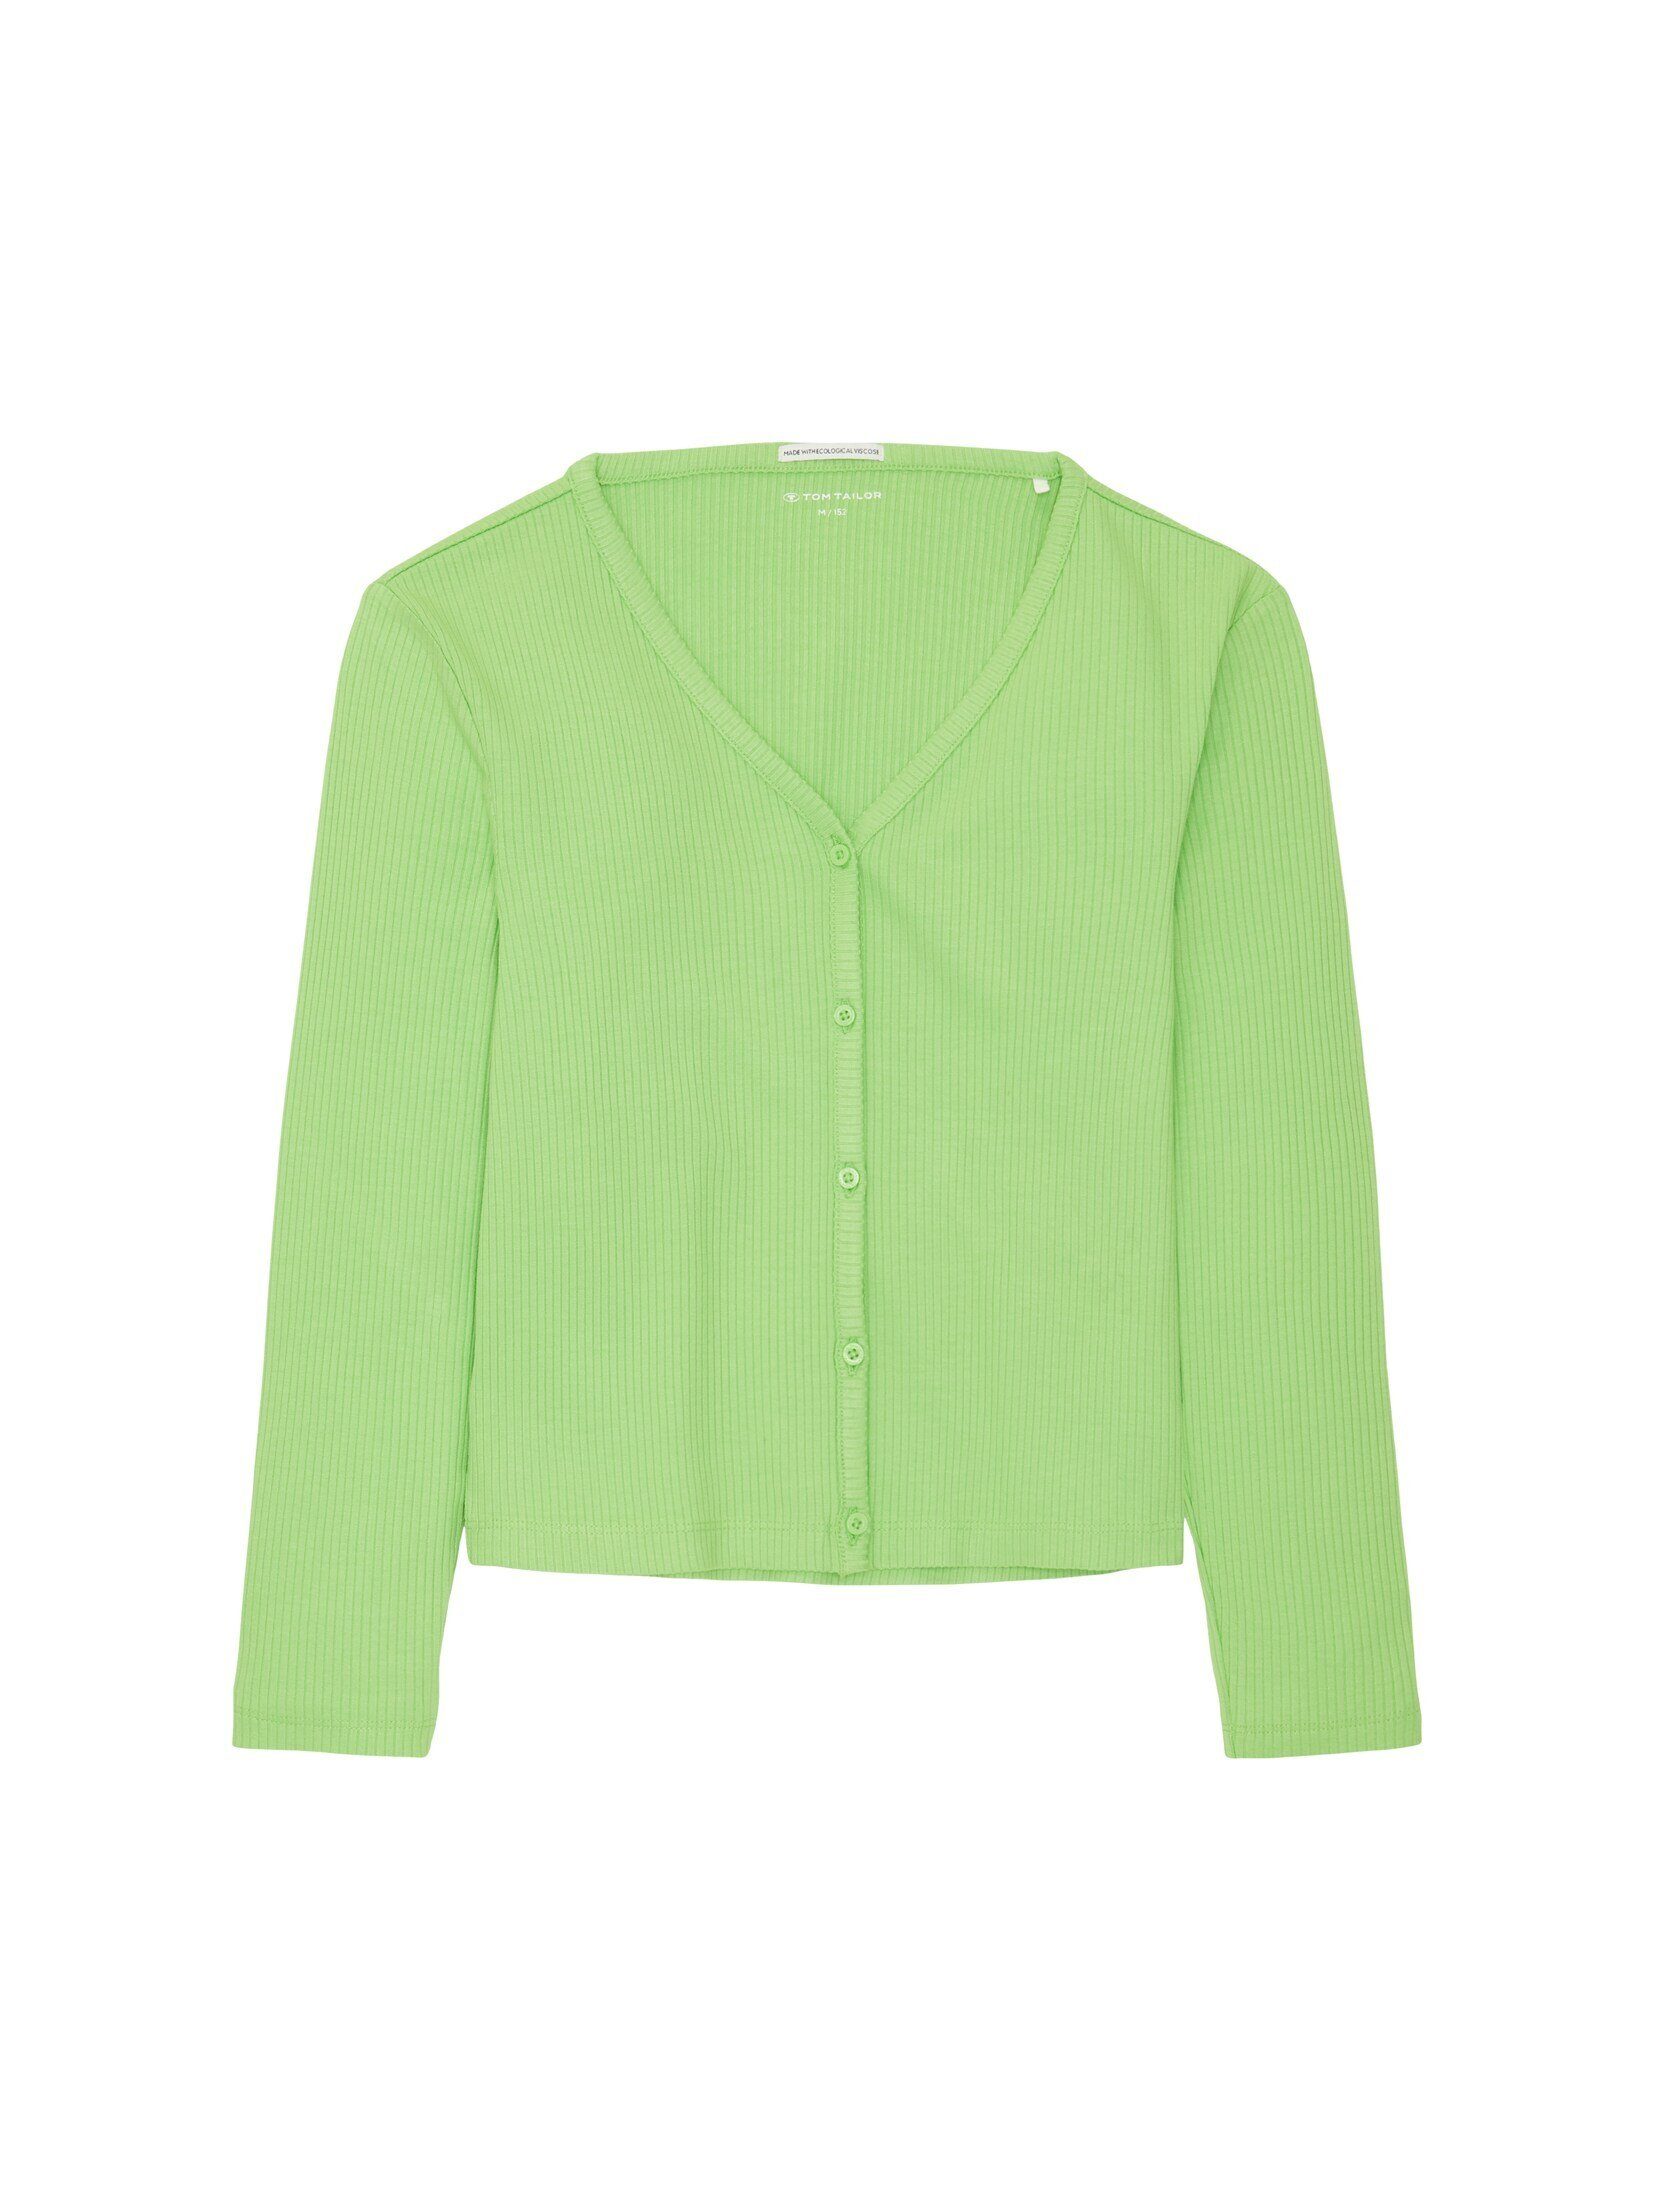 TOM TAILOR lime T-Shirt liquid green Cropped Rippjacke